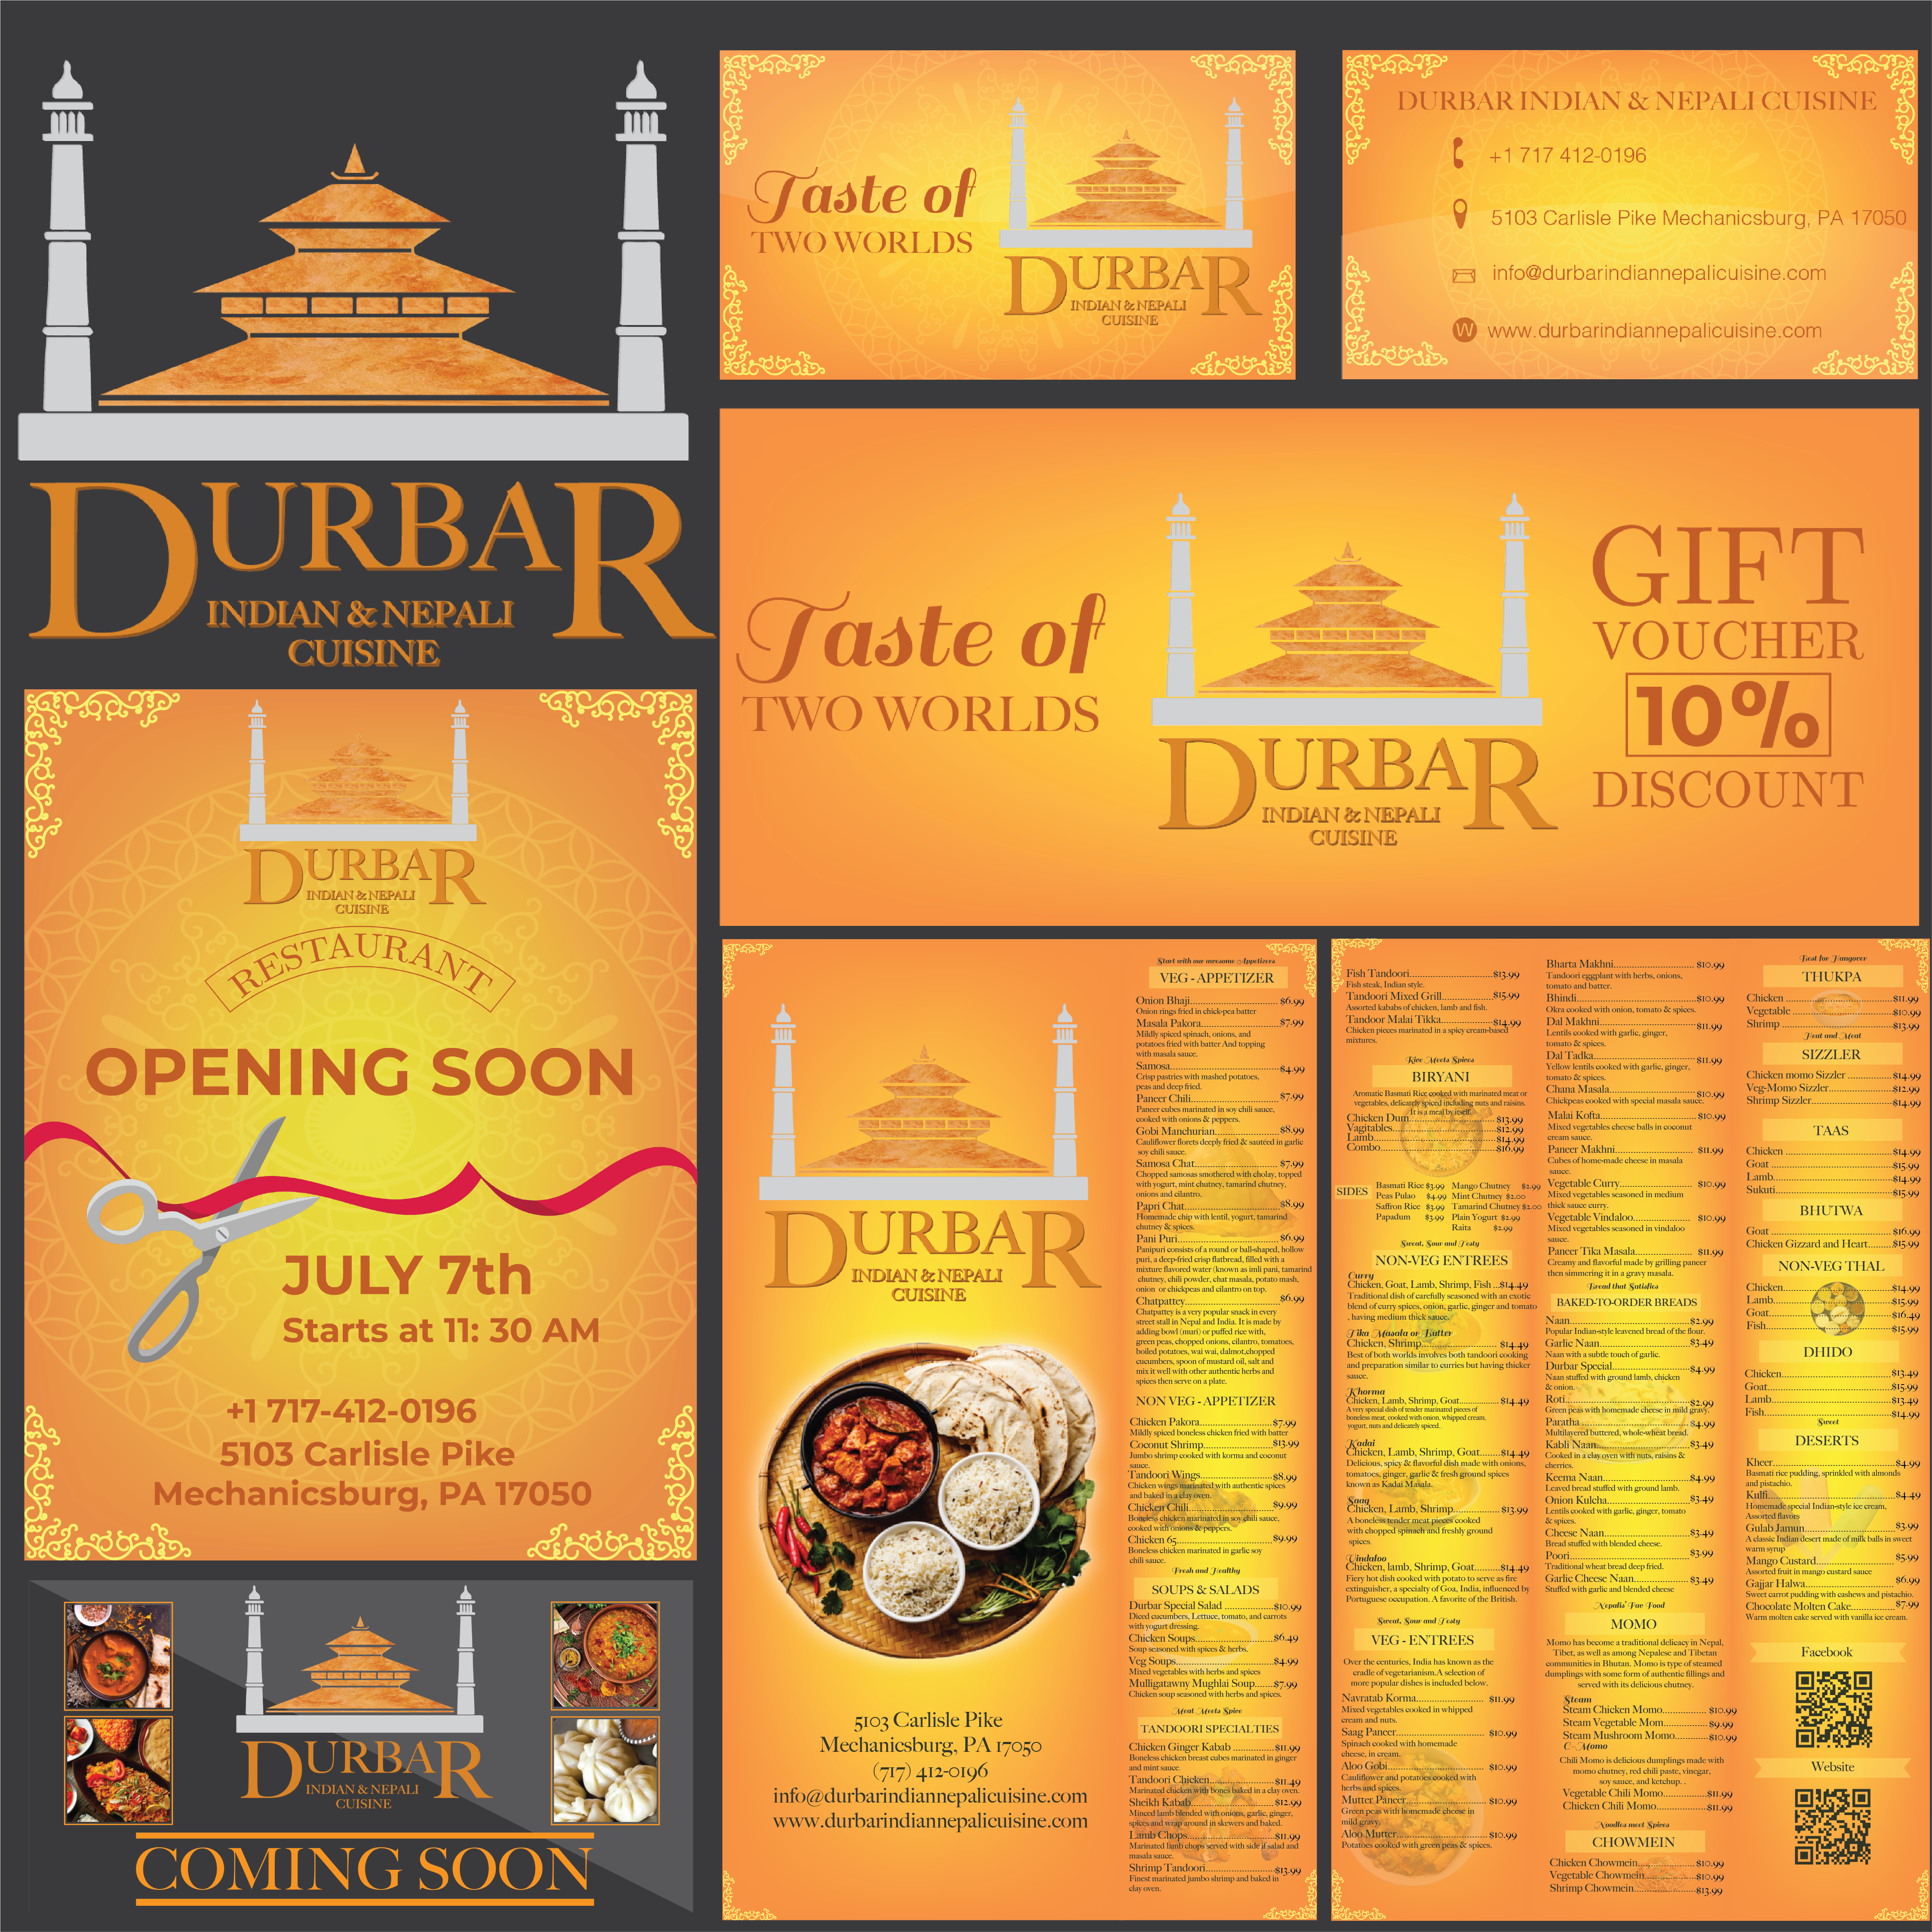 Durbar Indian and Nepali Cuisine